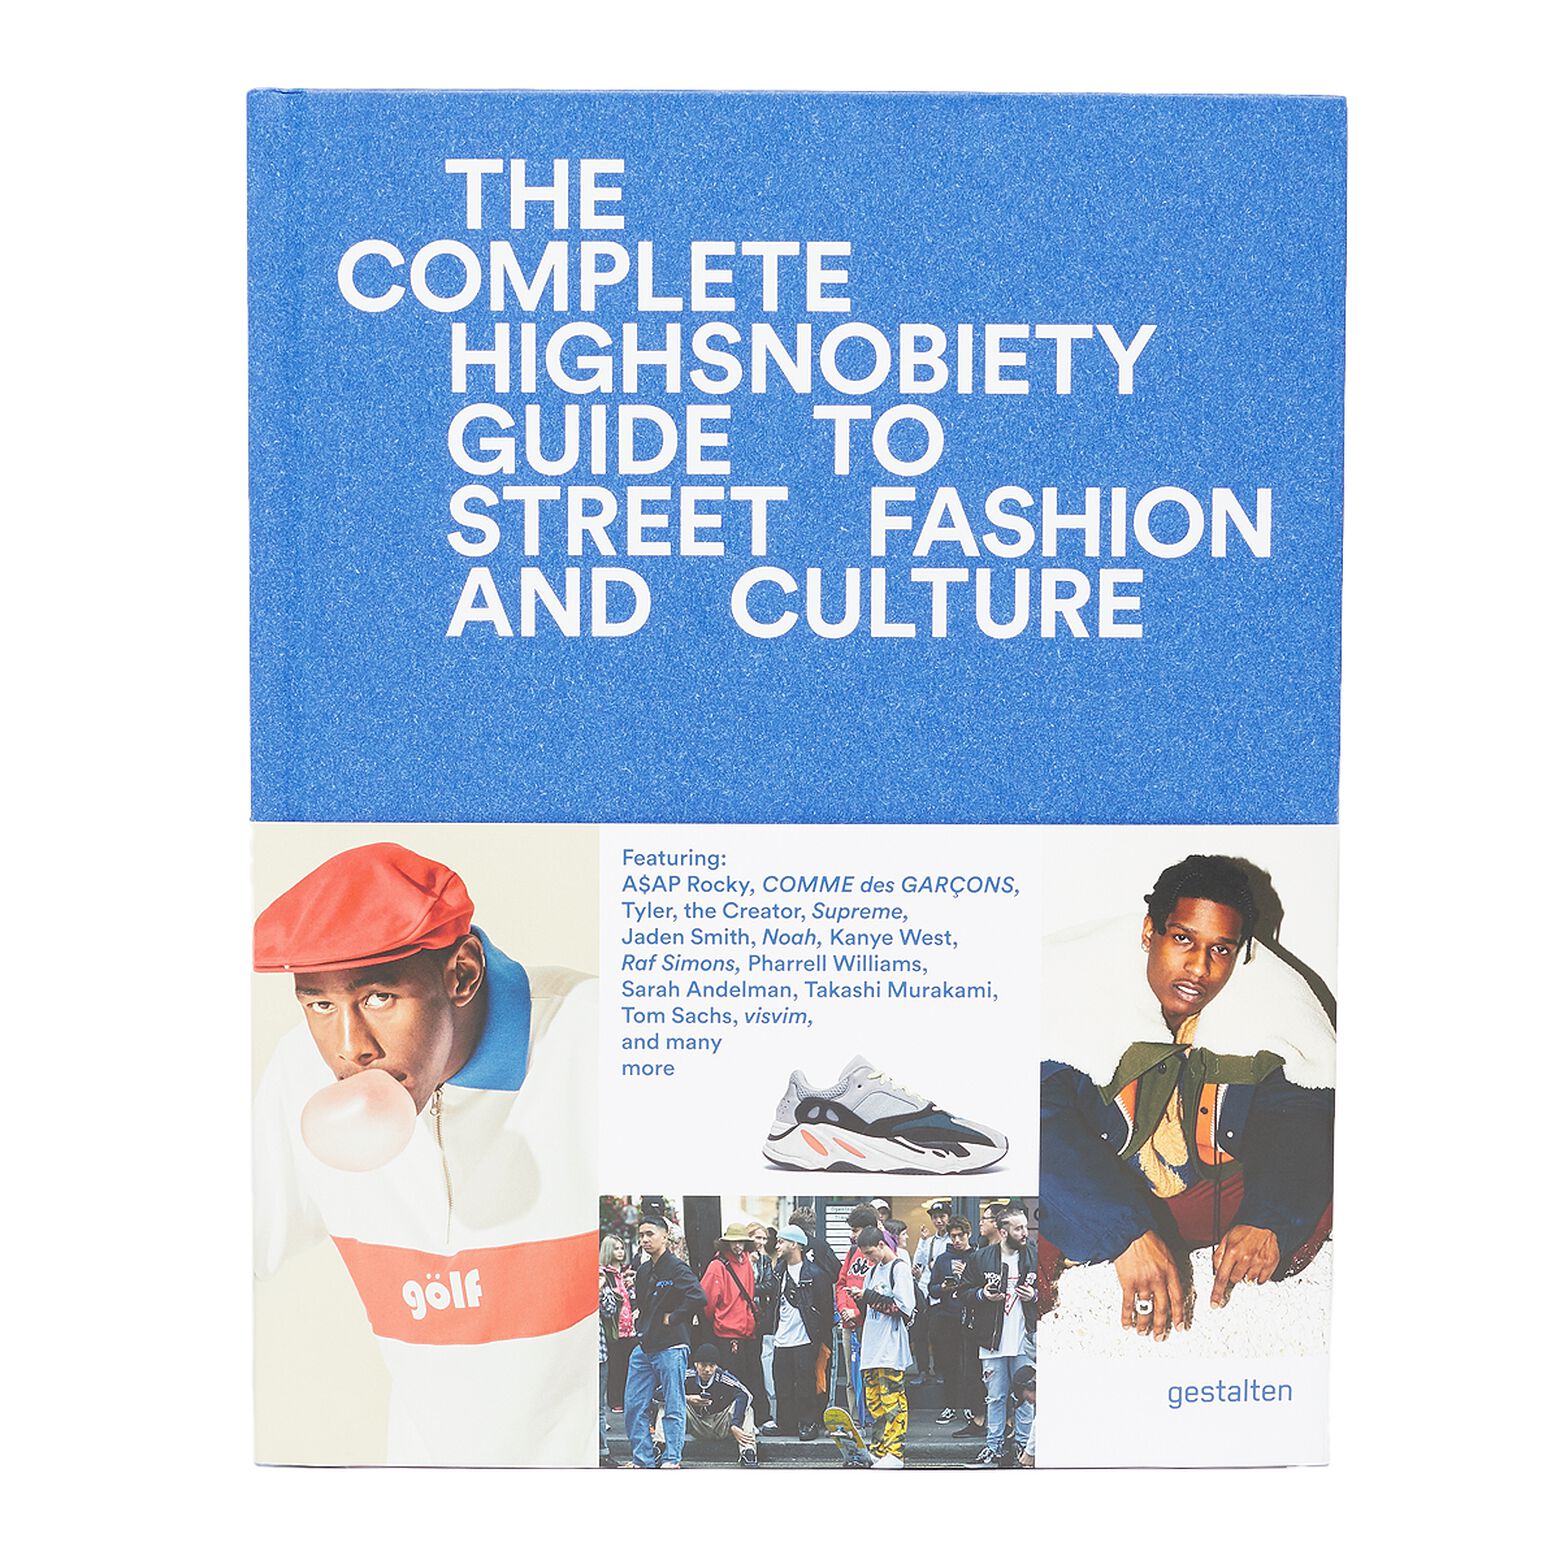 The Complete Highsnobiety Guide To Street Fashion And Culture